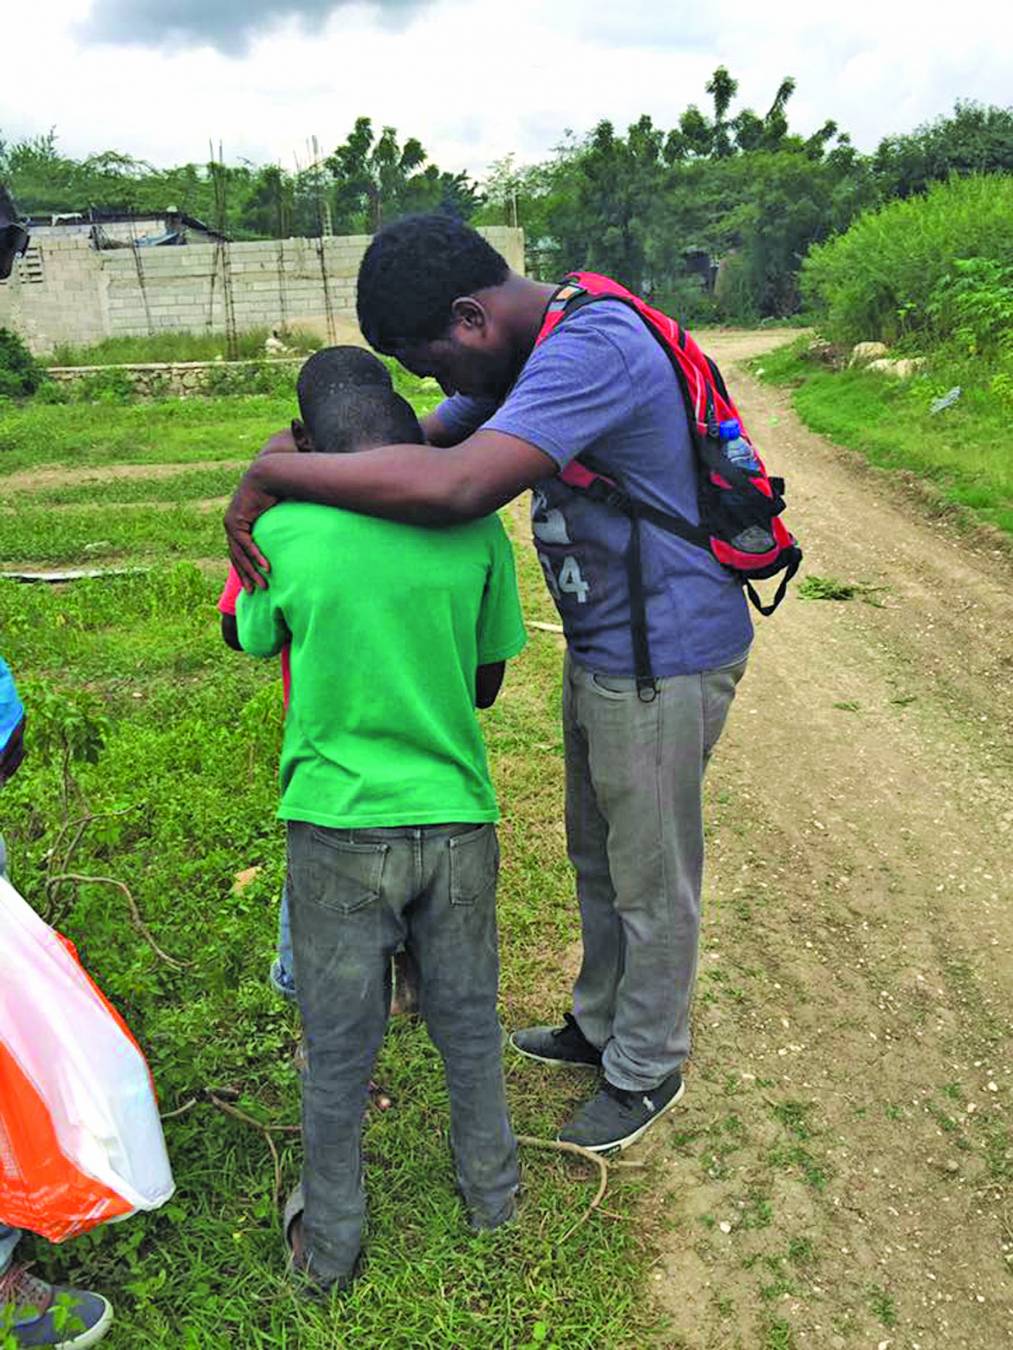 A Haitian boy is prayed for during a Louisiana Baptist mission trip to the country. Mission teams will be needed to build a children’s village, medical clinic, pastor’s training center and hotel in Haiti.